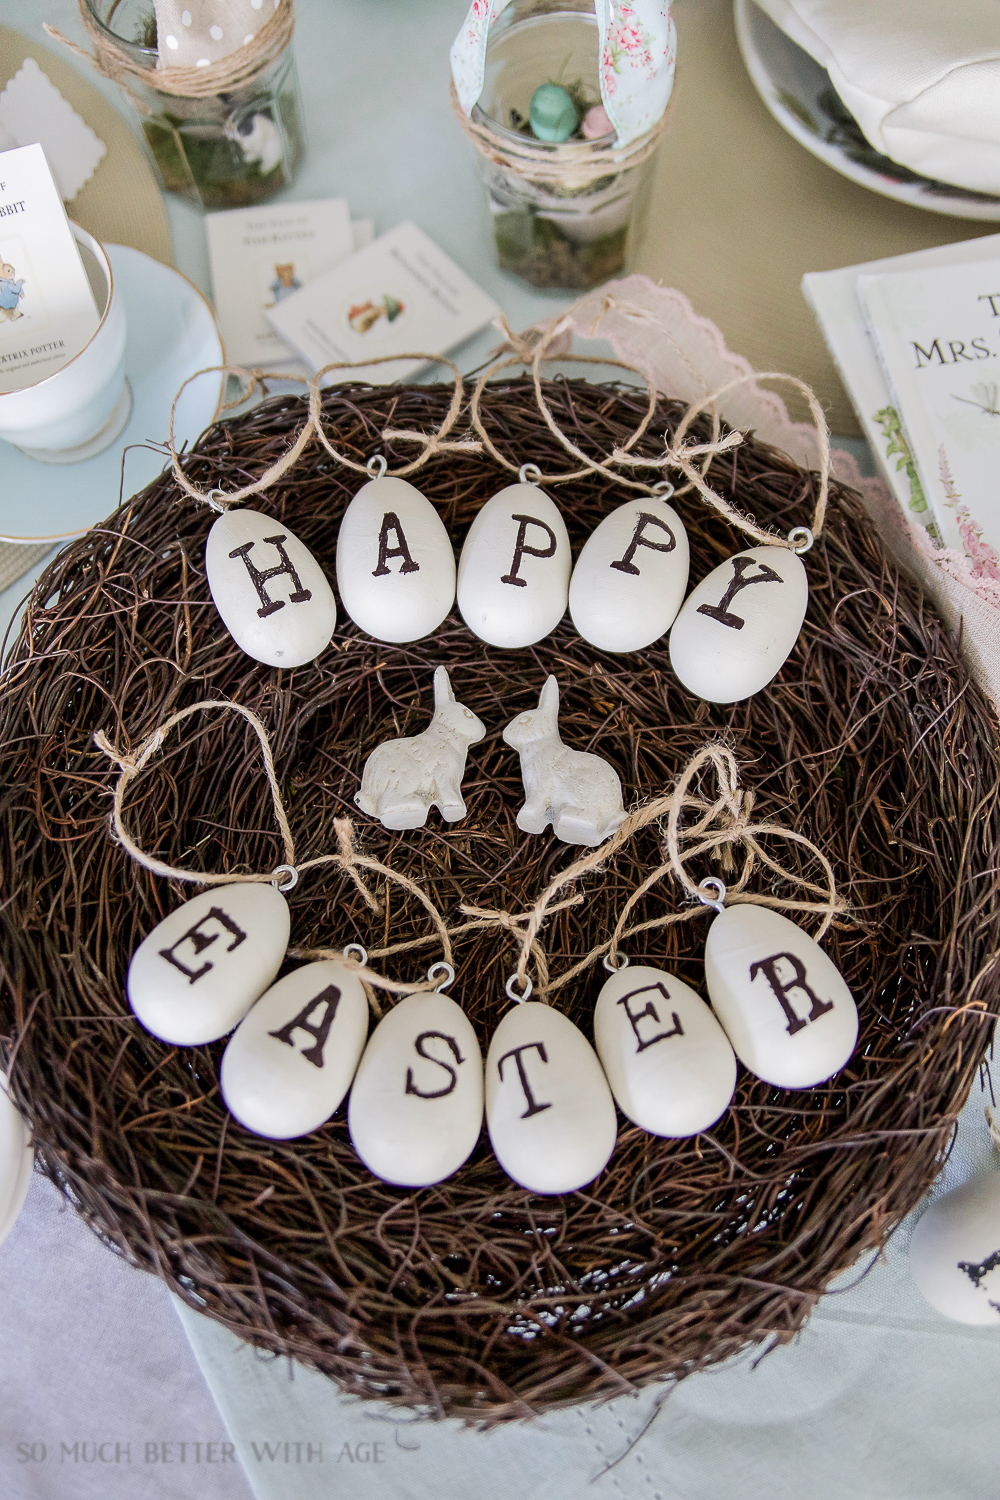 A nest filled with Eggs spelling out Happy Easter.